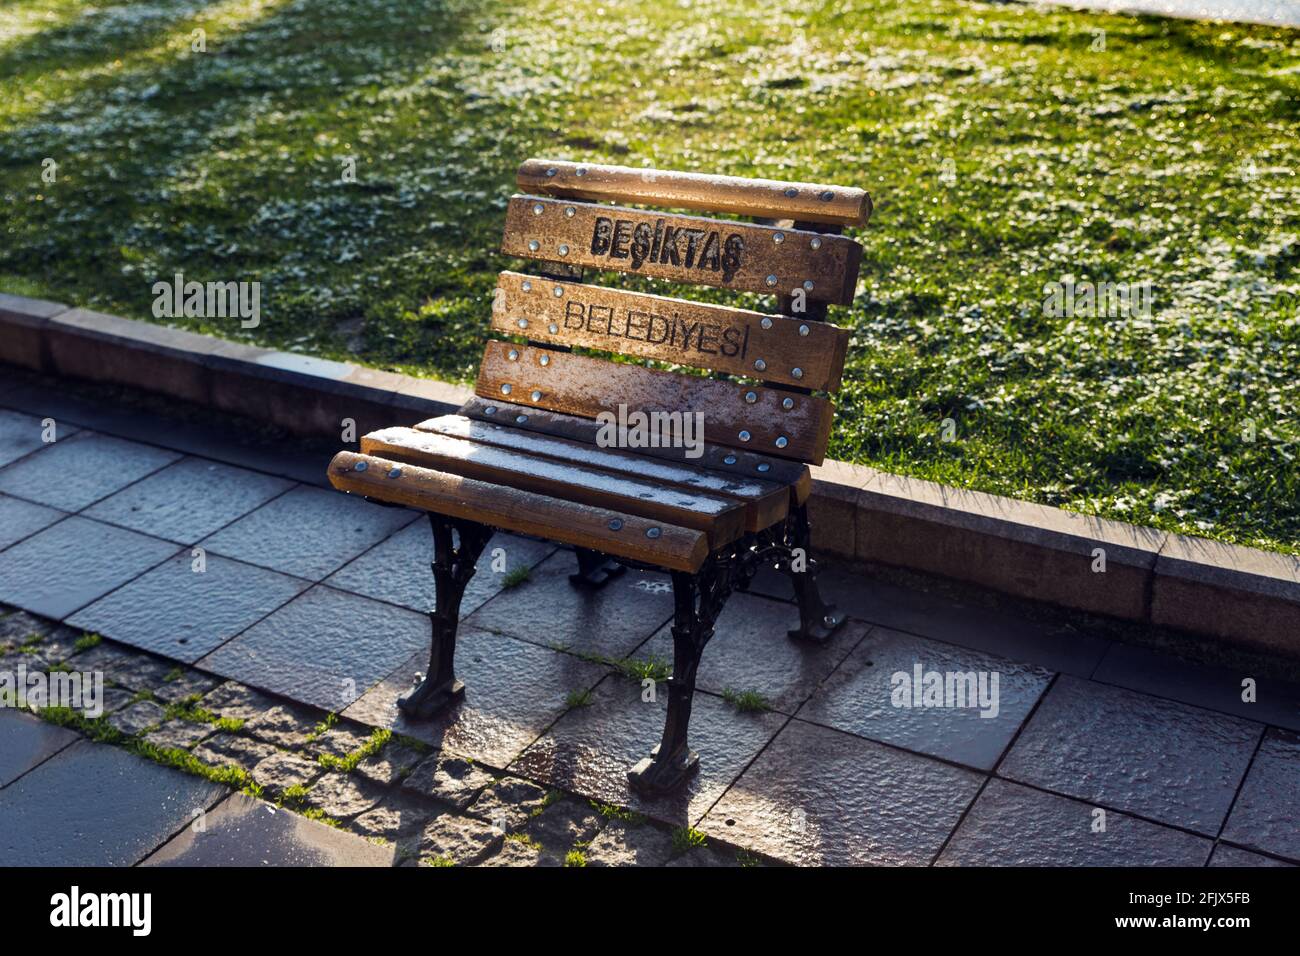 Levent, Istanbul, Turkey - January 28th, 2021: Single person, modified wooden bench belonging to the Besiktas Municipality of Istanbul, to provide a f Stock Photo